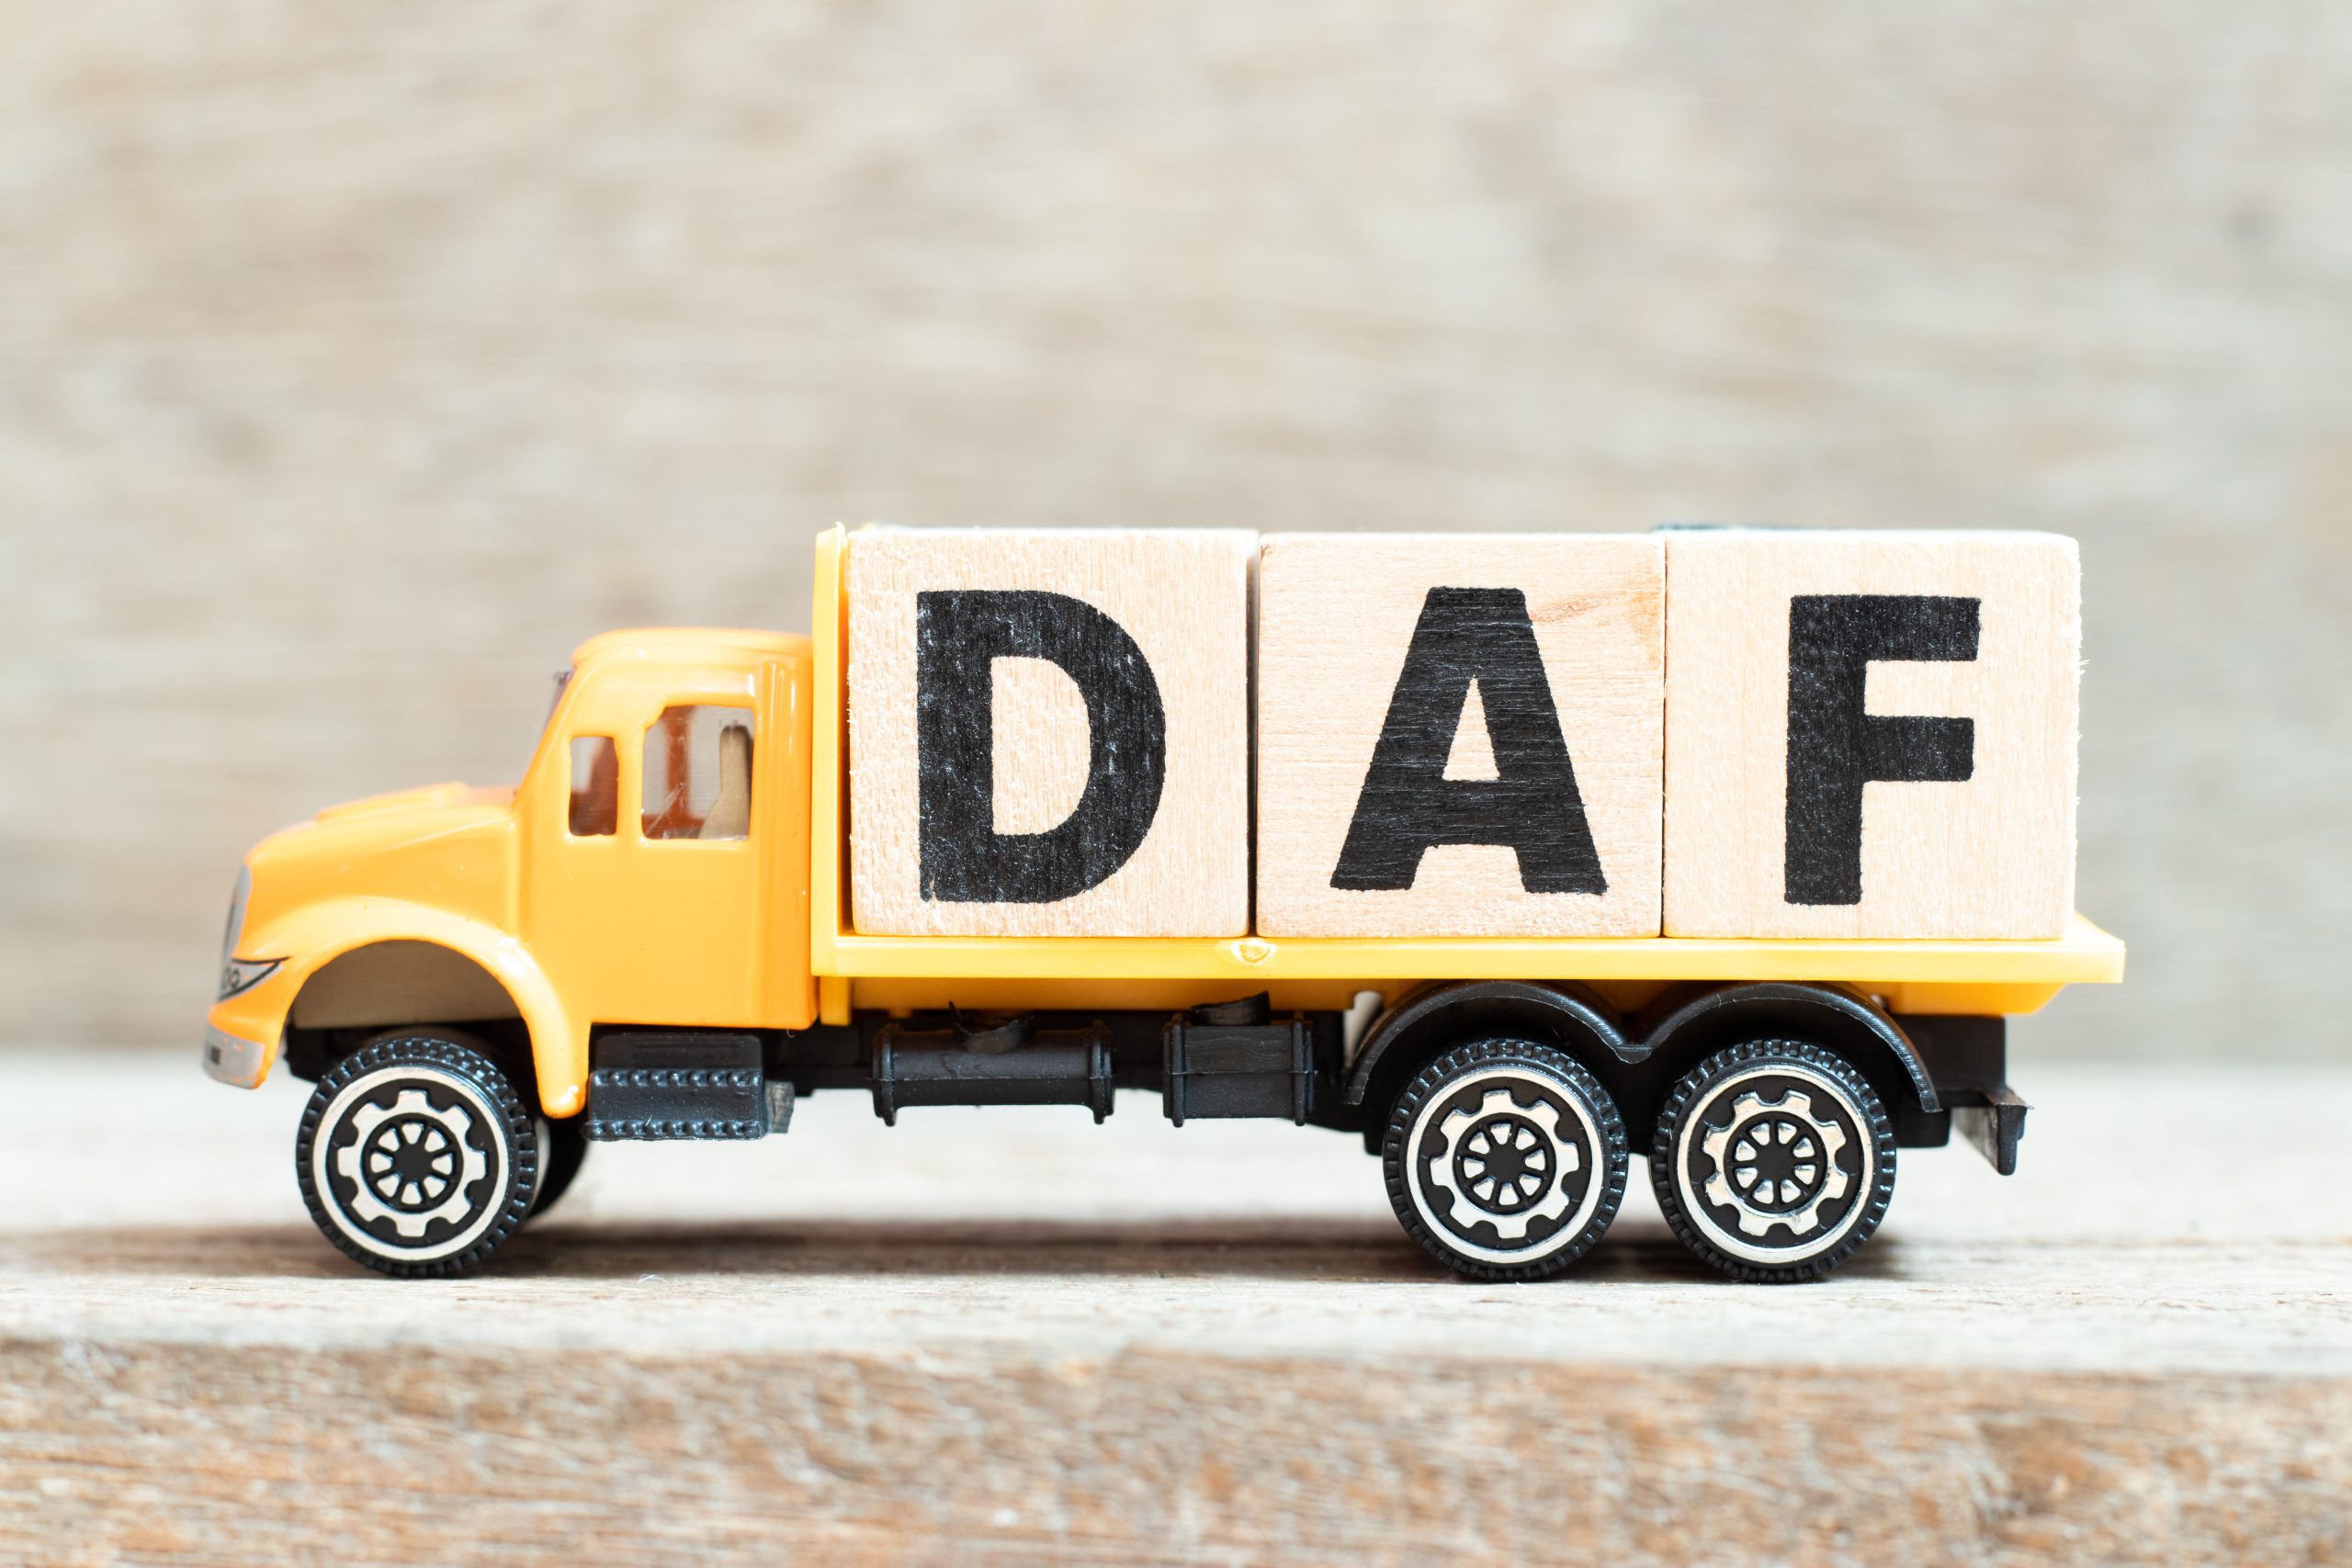 Profile view of yellow toy truck with flat bed carrying three wooden blocks that have "D" "A" "F" printed on them.